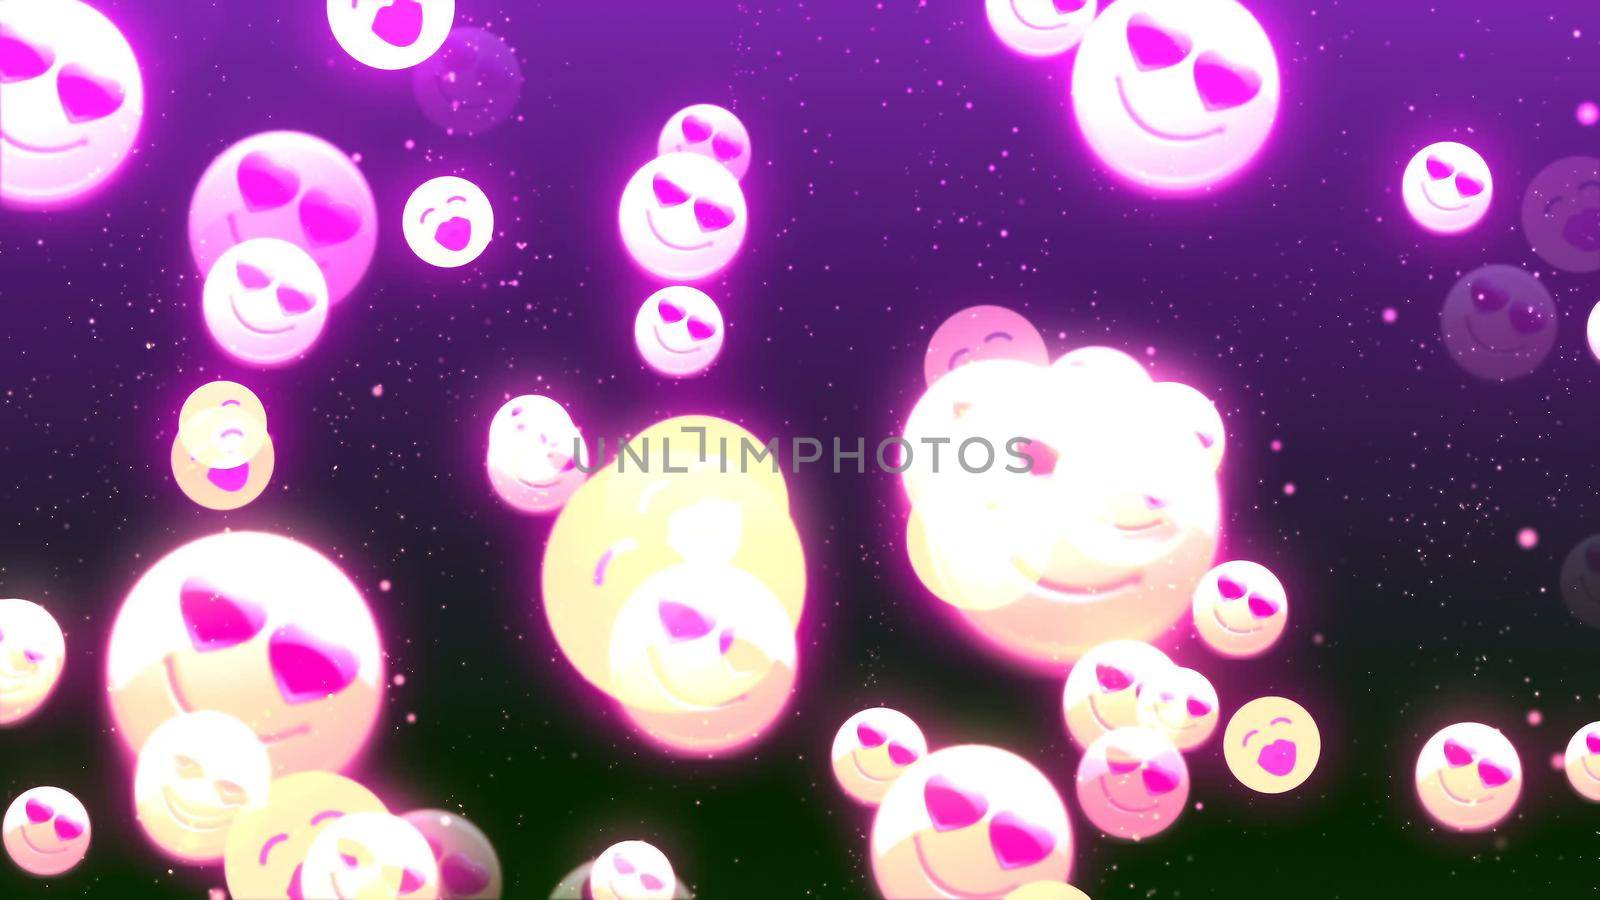 Abstract Background with nice loving smiles